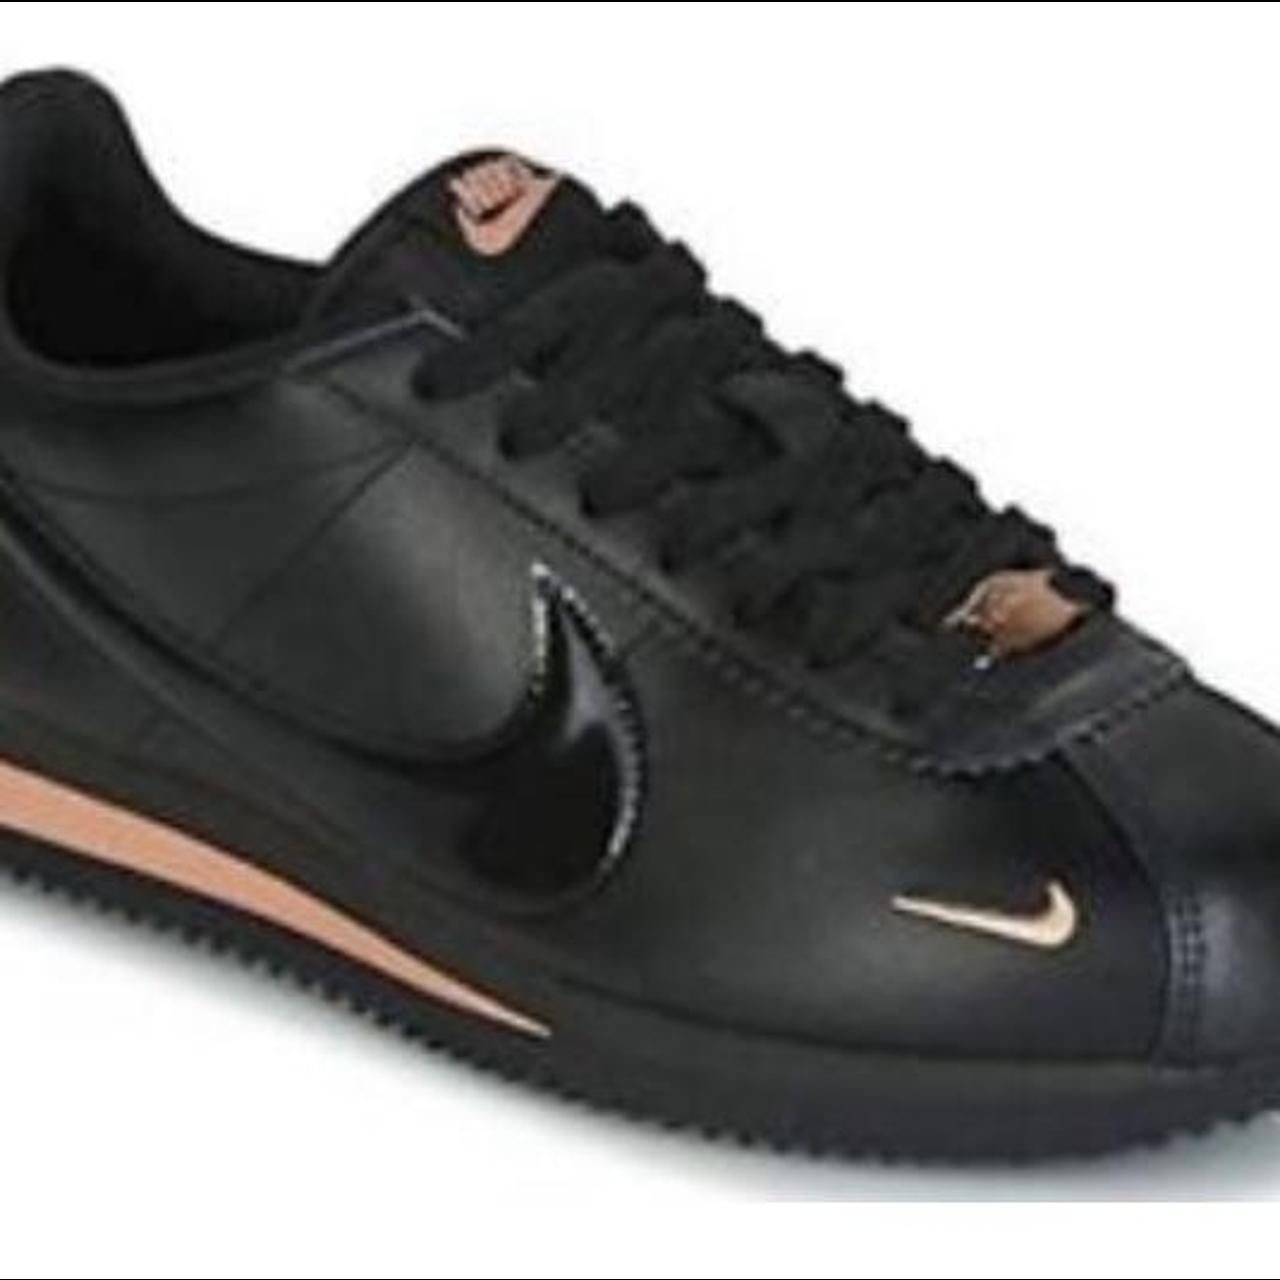 Nike Cortez trainers in black and rose gold